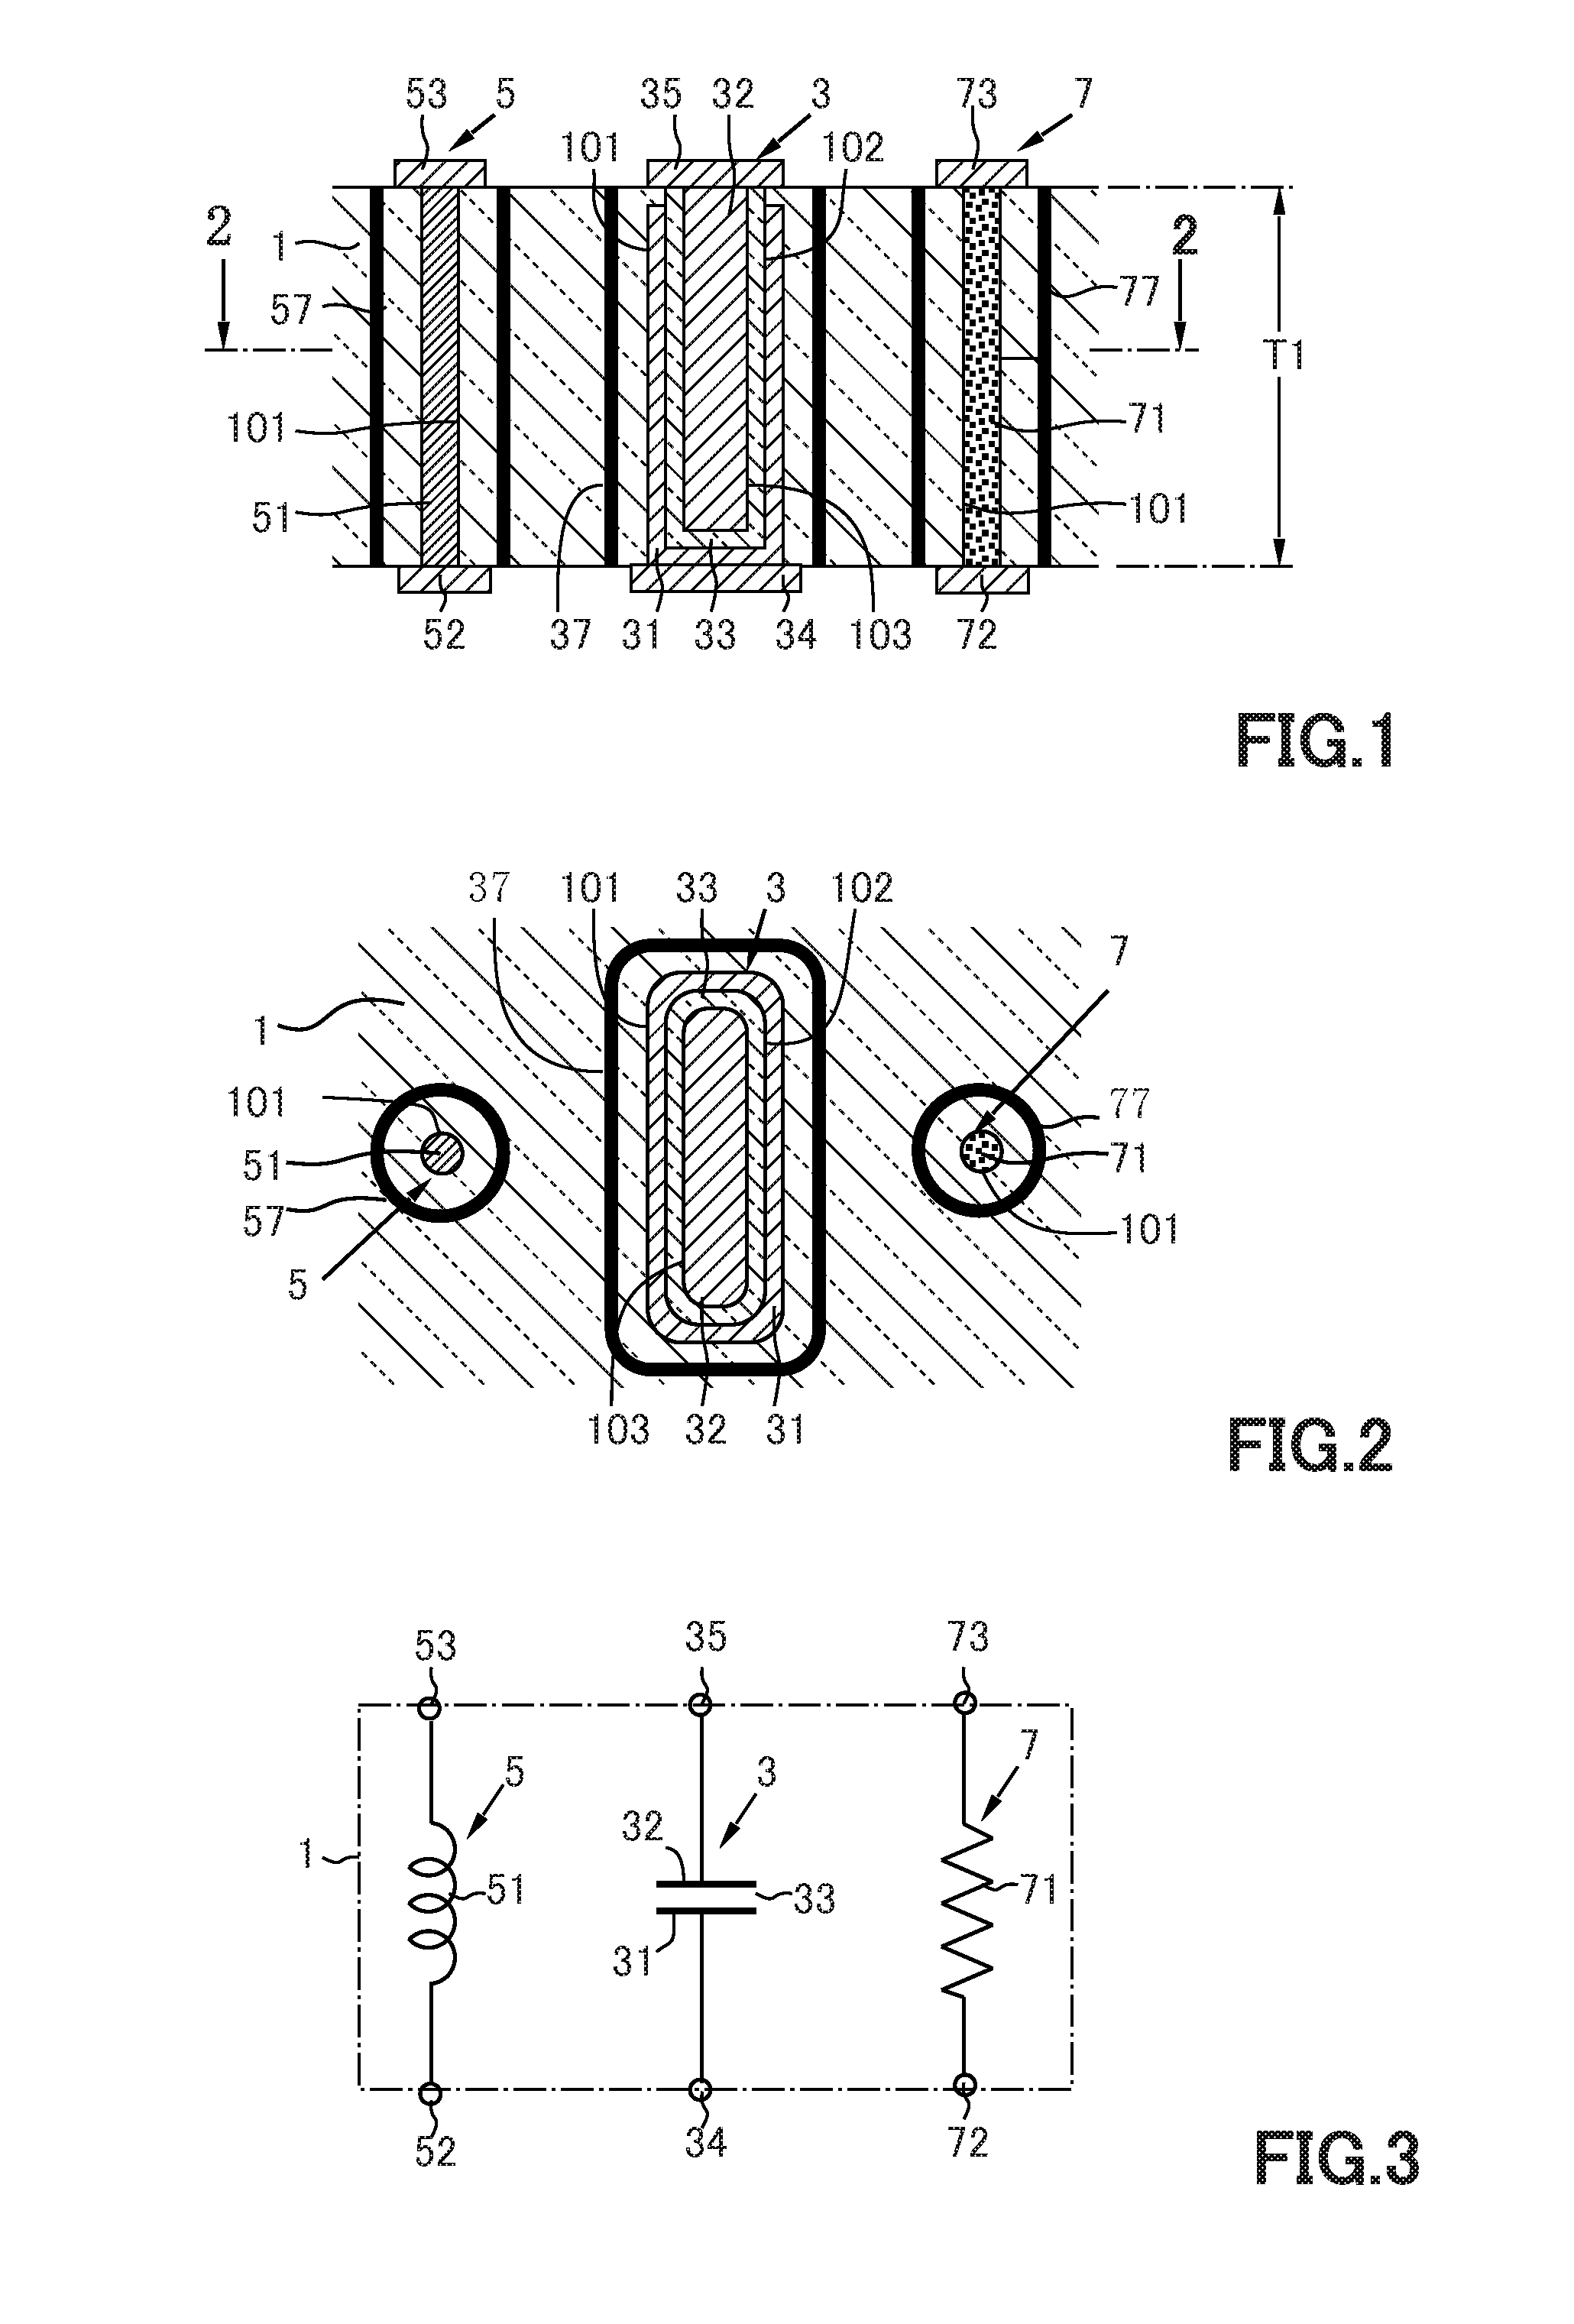 Substrate with built-in passive element